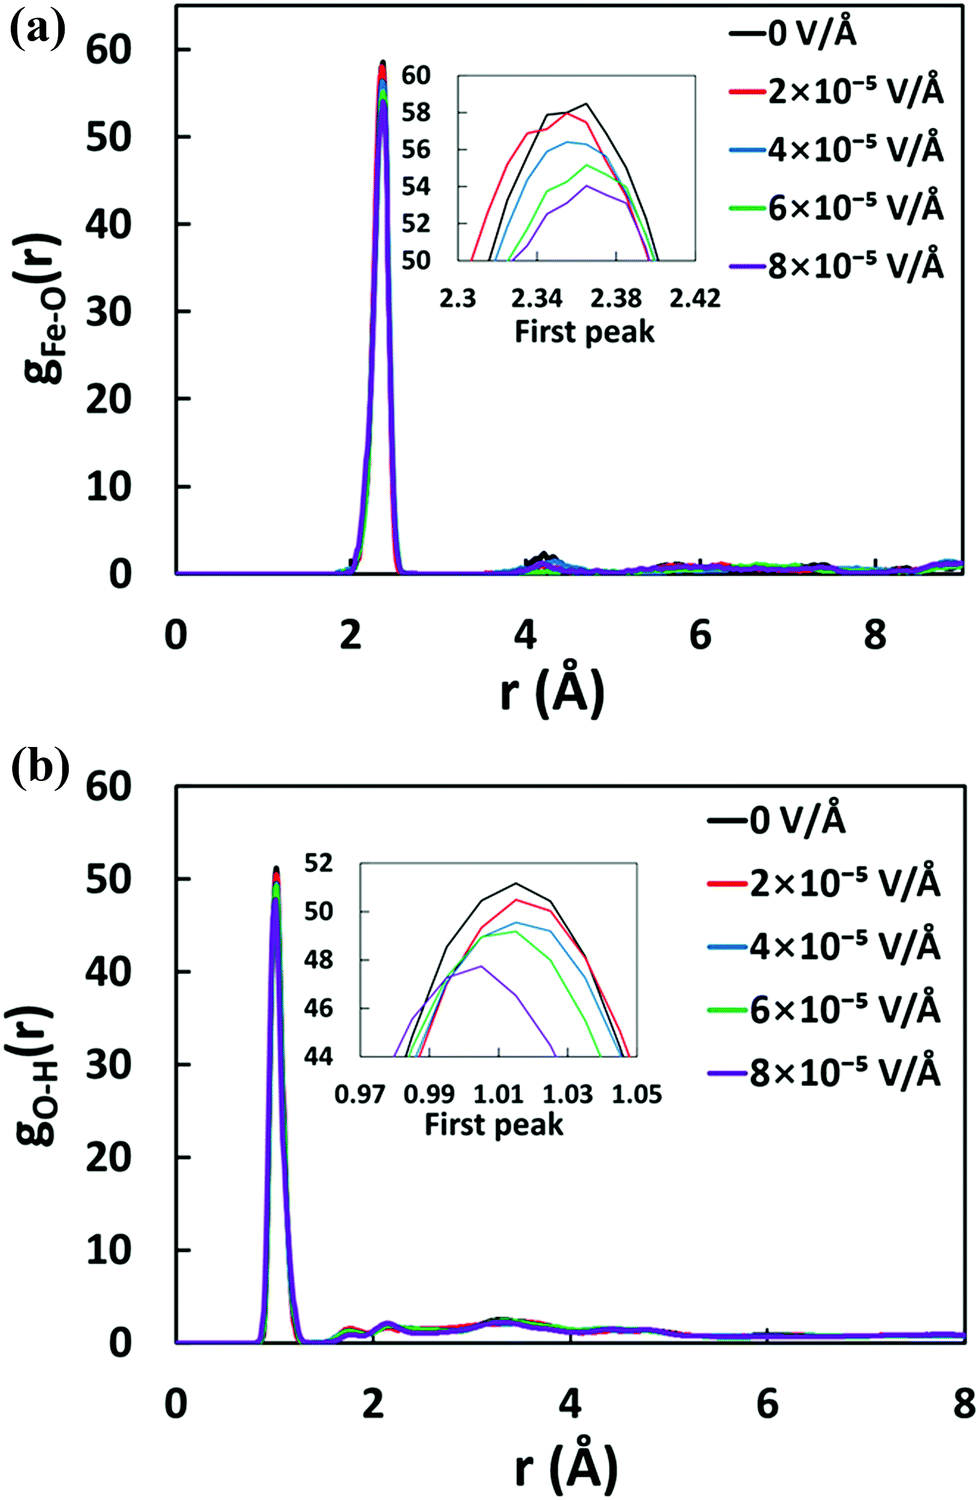 Influence Of An External Electric Field On The Deprotonation Reactions Of An Fe 3 Solvated Molecule A Reactive Molecular Dynamics Study Physical Chemistry Chemical Physics Rsc Publishing Doi 10 1039 D0cph